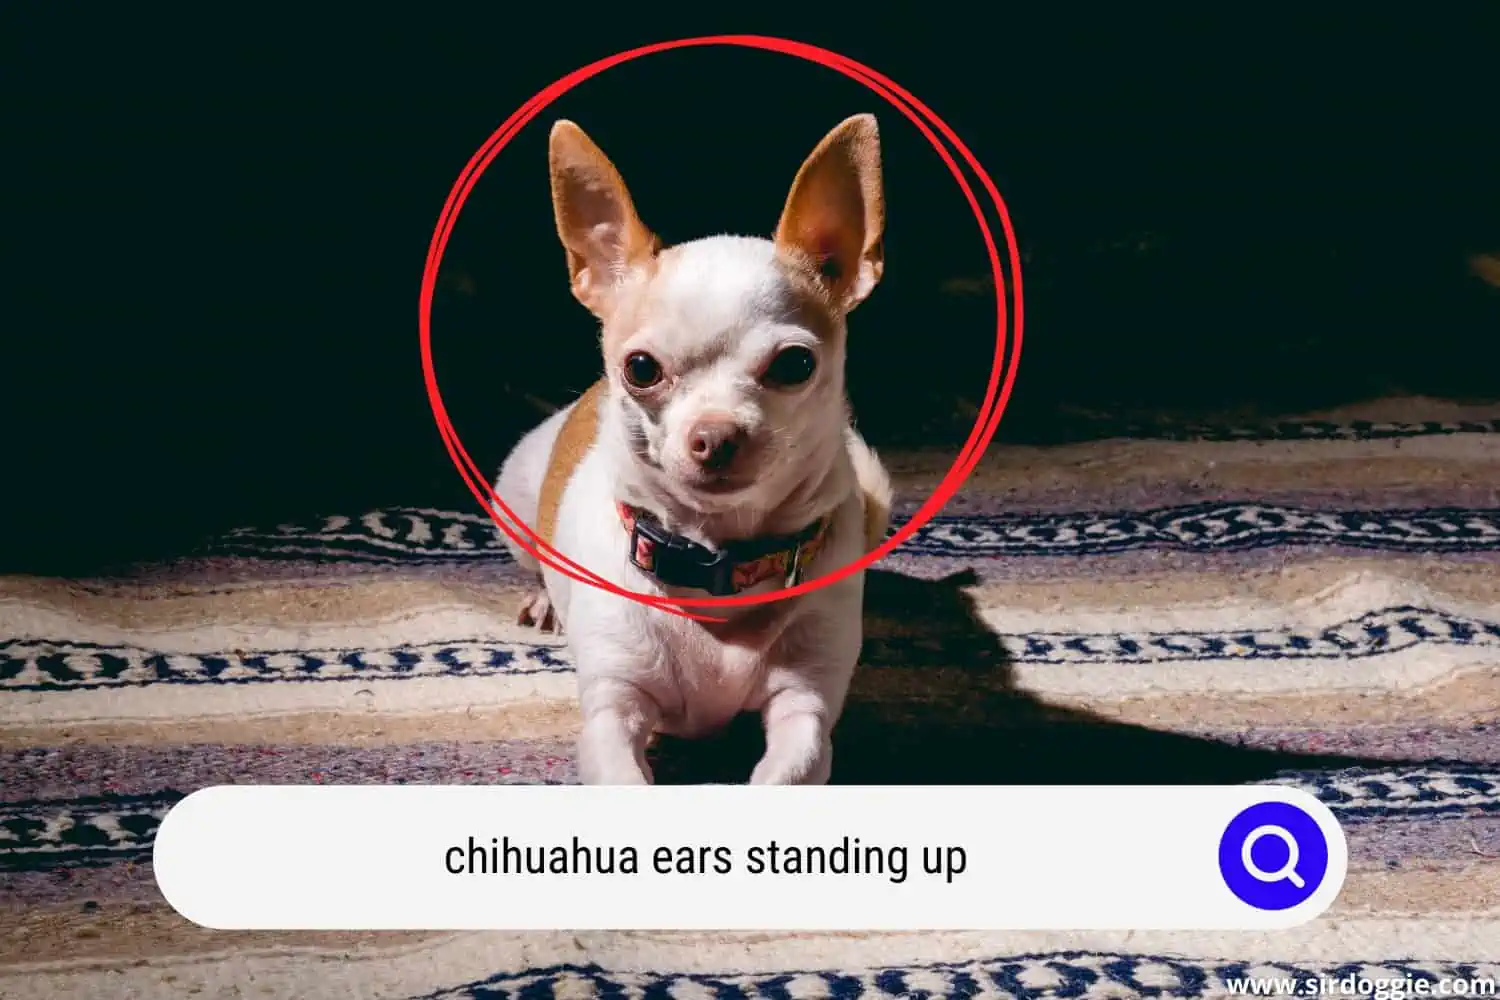 chihuahua ears standing up